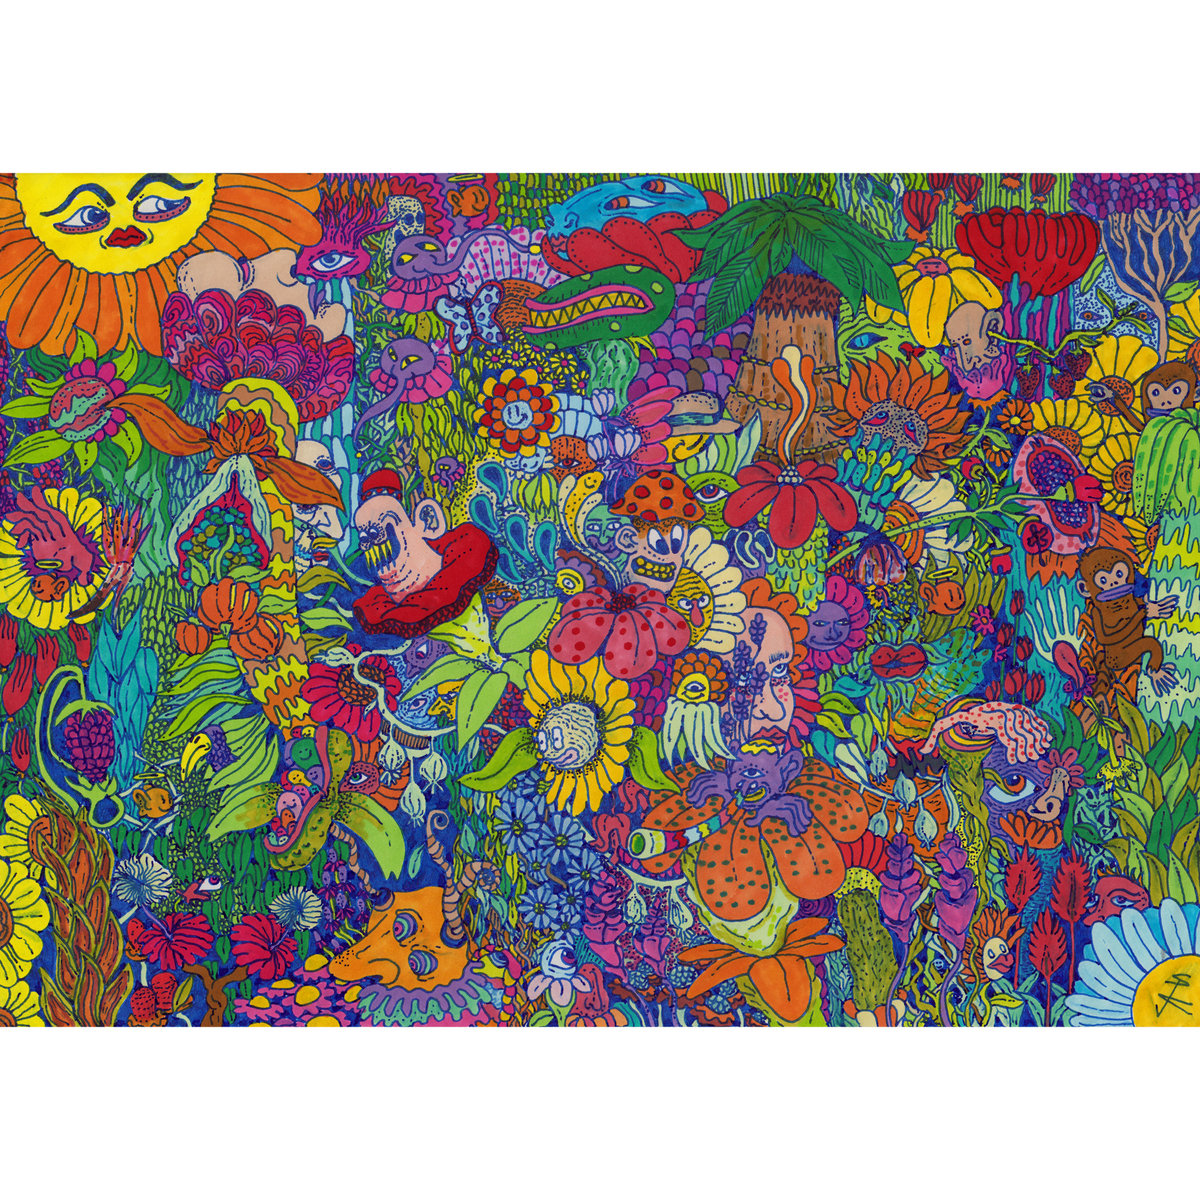 Image of Limited Edition "Garden of Eden" high quality A3 art print